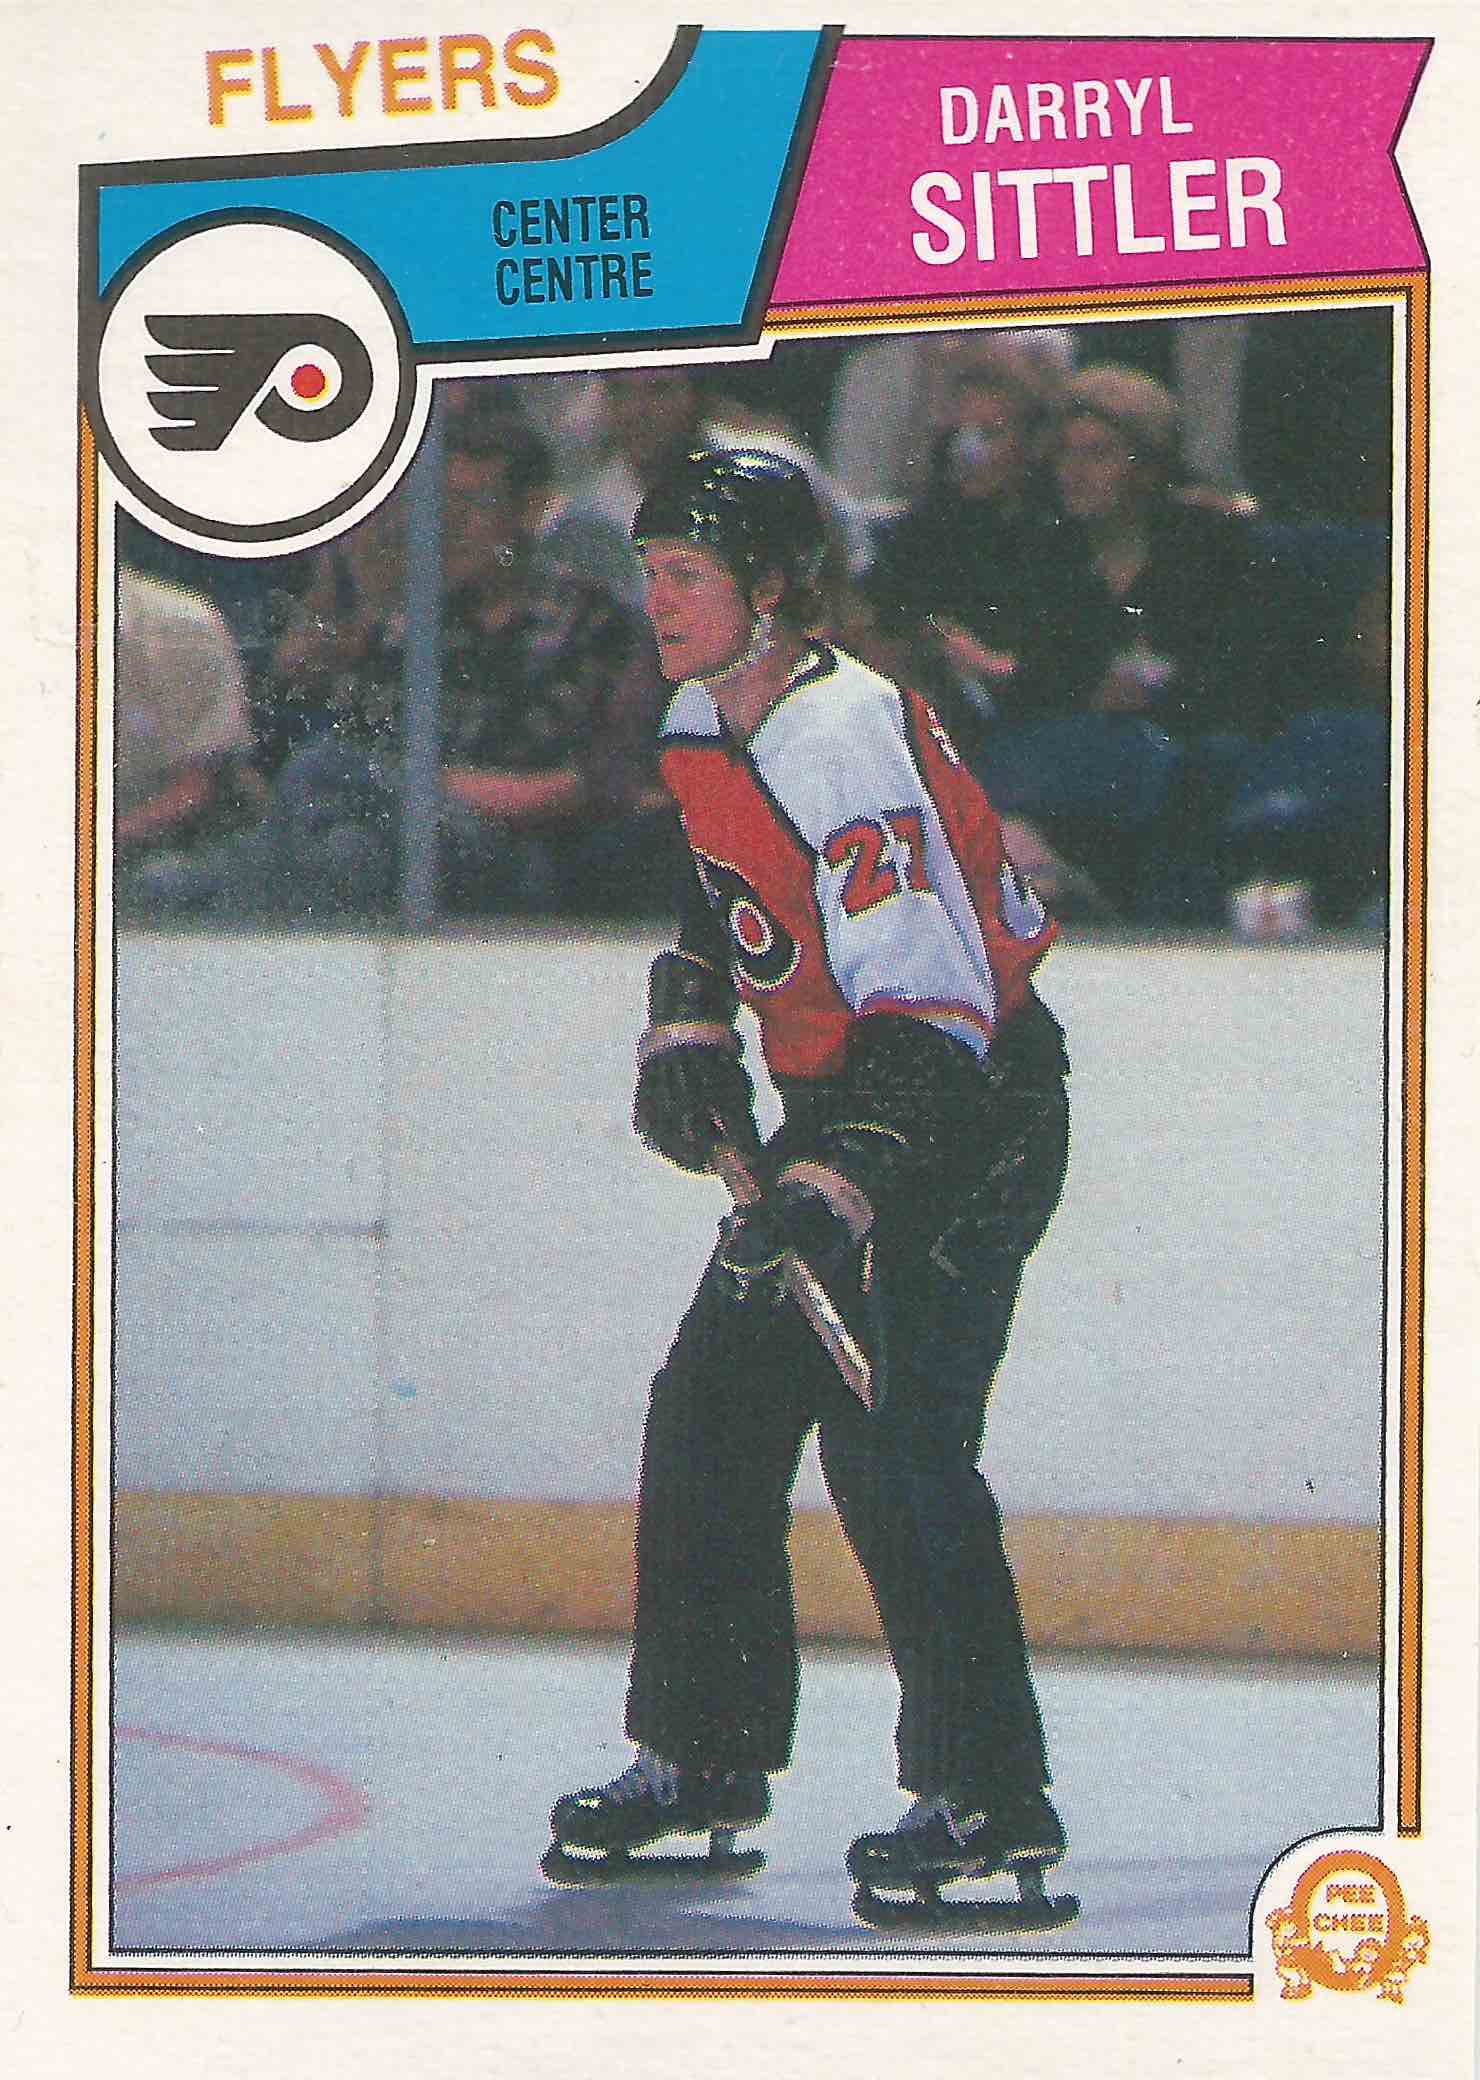 Orange & Black & Cooperalls. The early 80's long hockey pants will